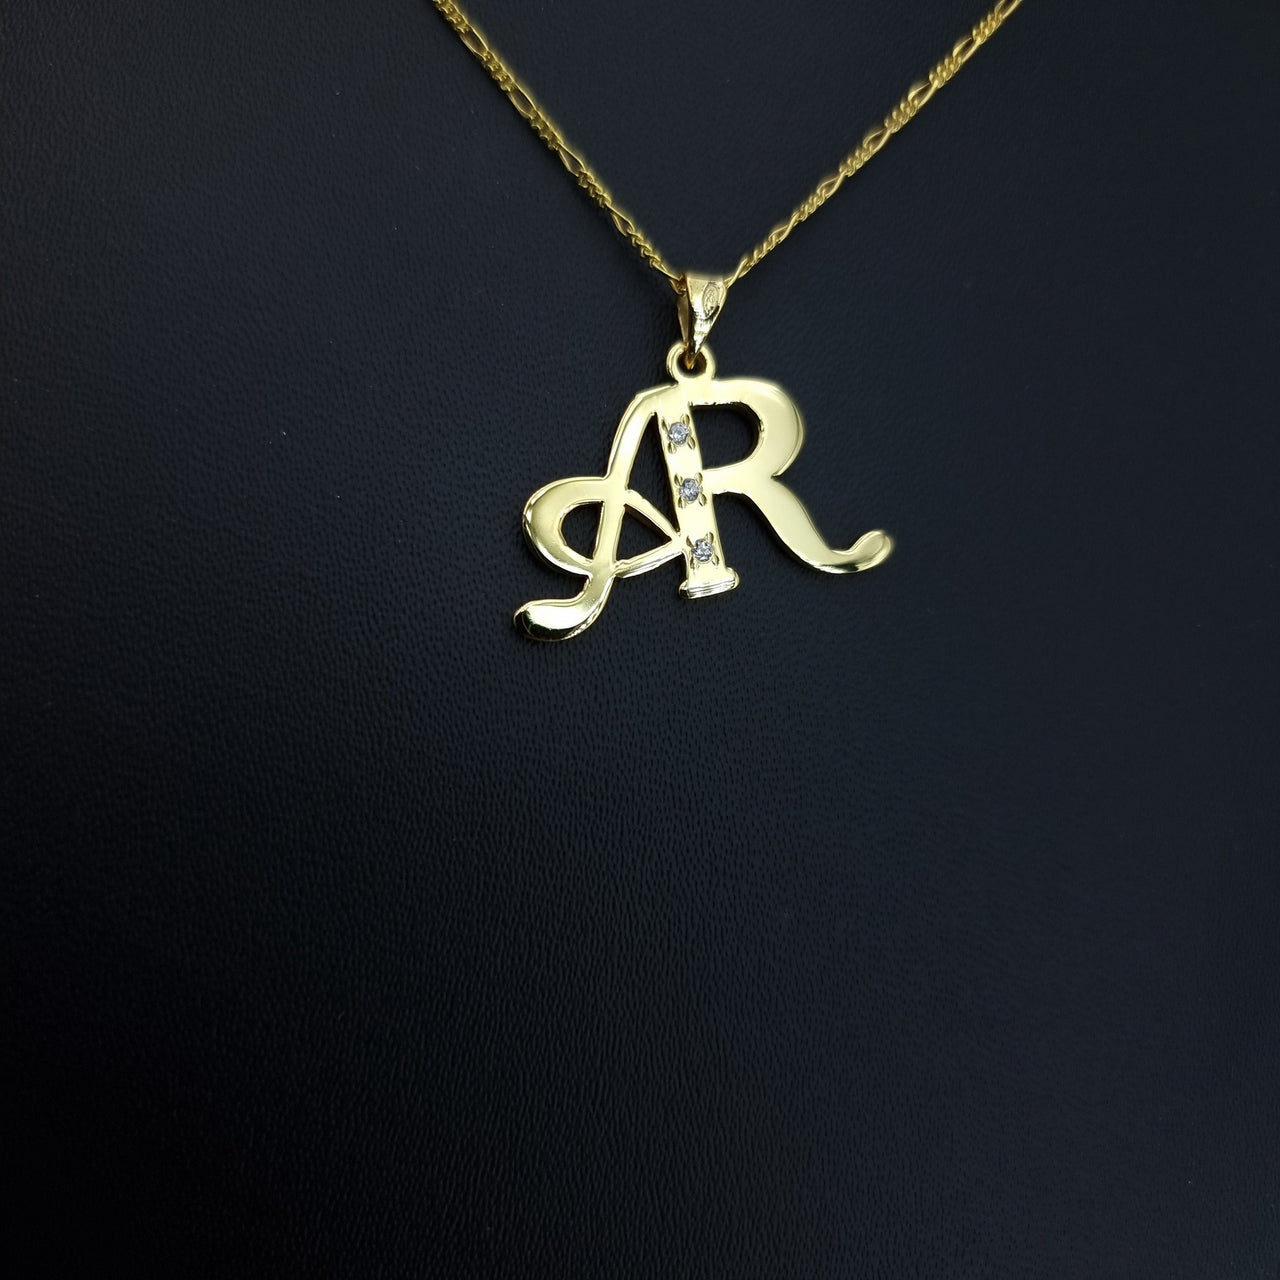 925 Silver - Gold Plated Handmade Initials with CZ Stones